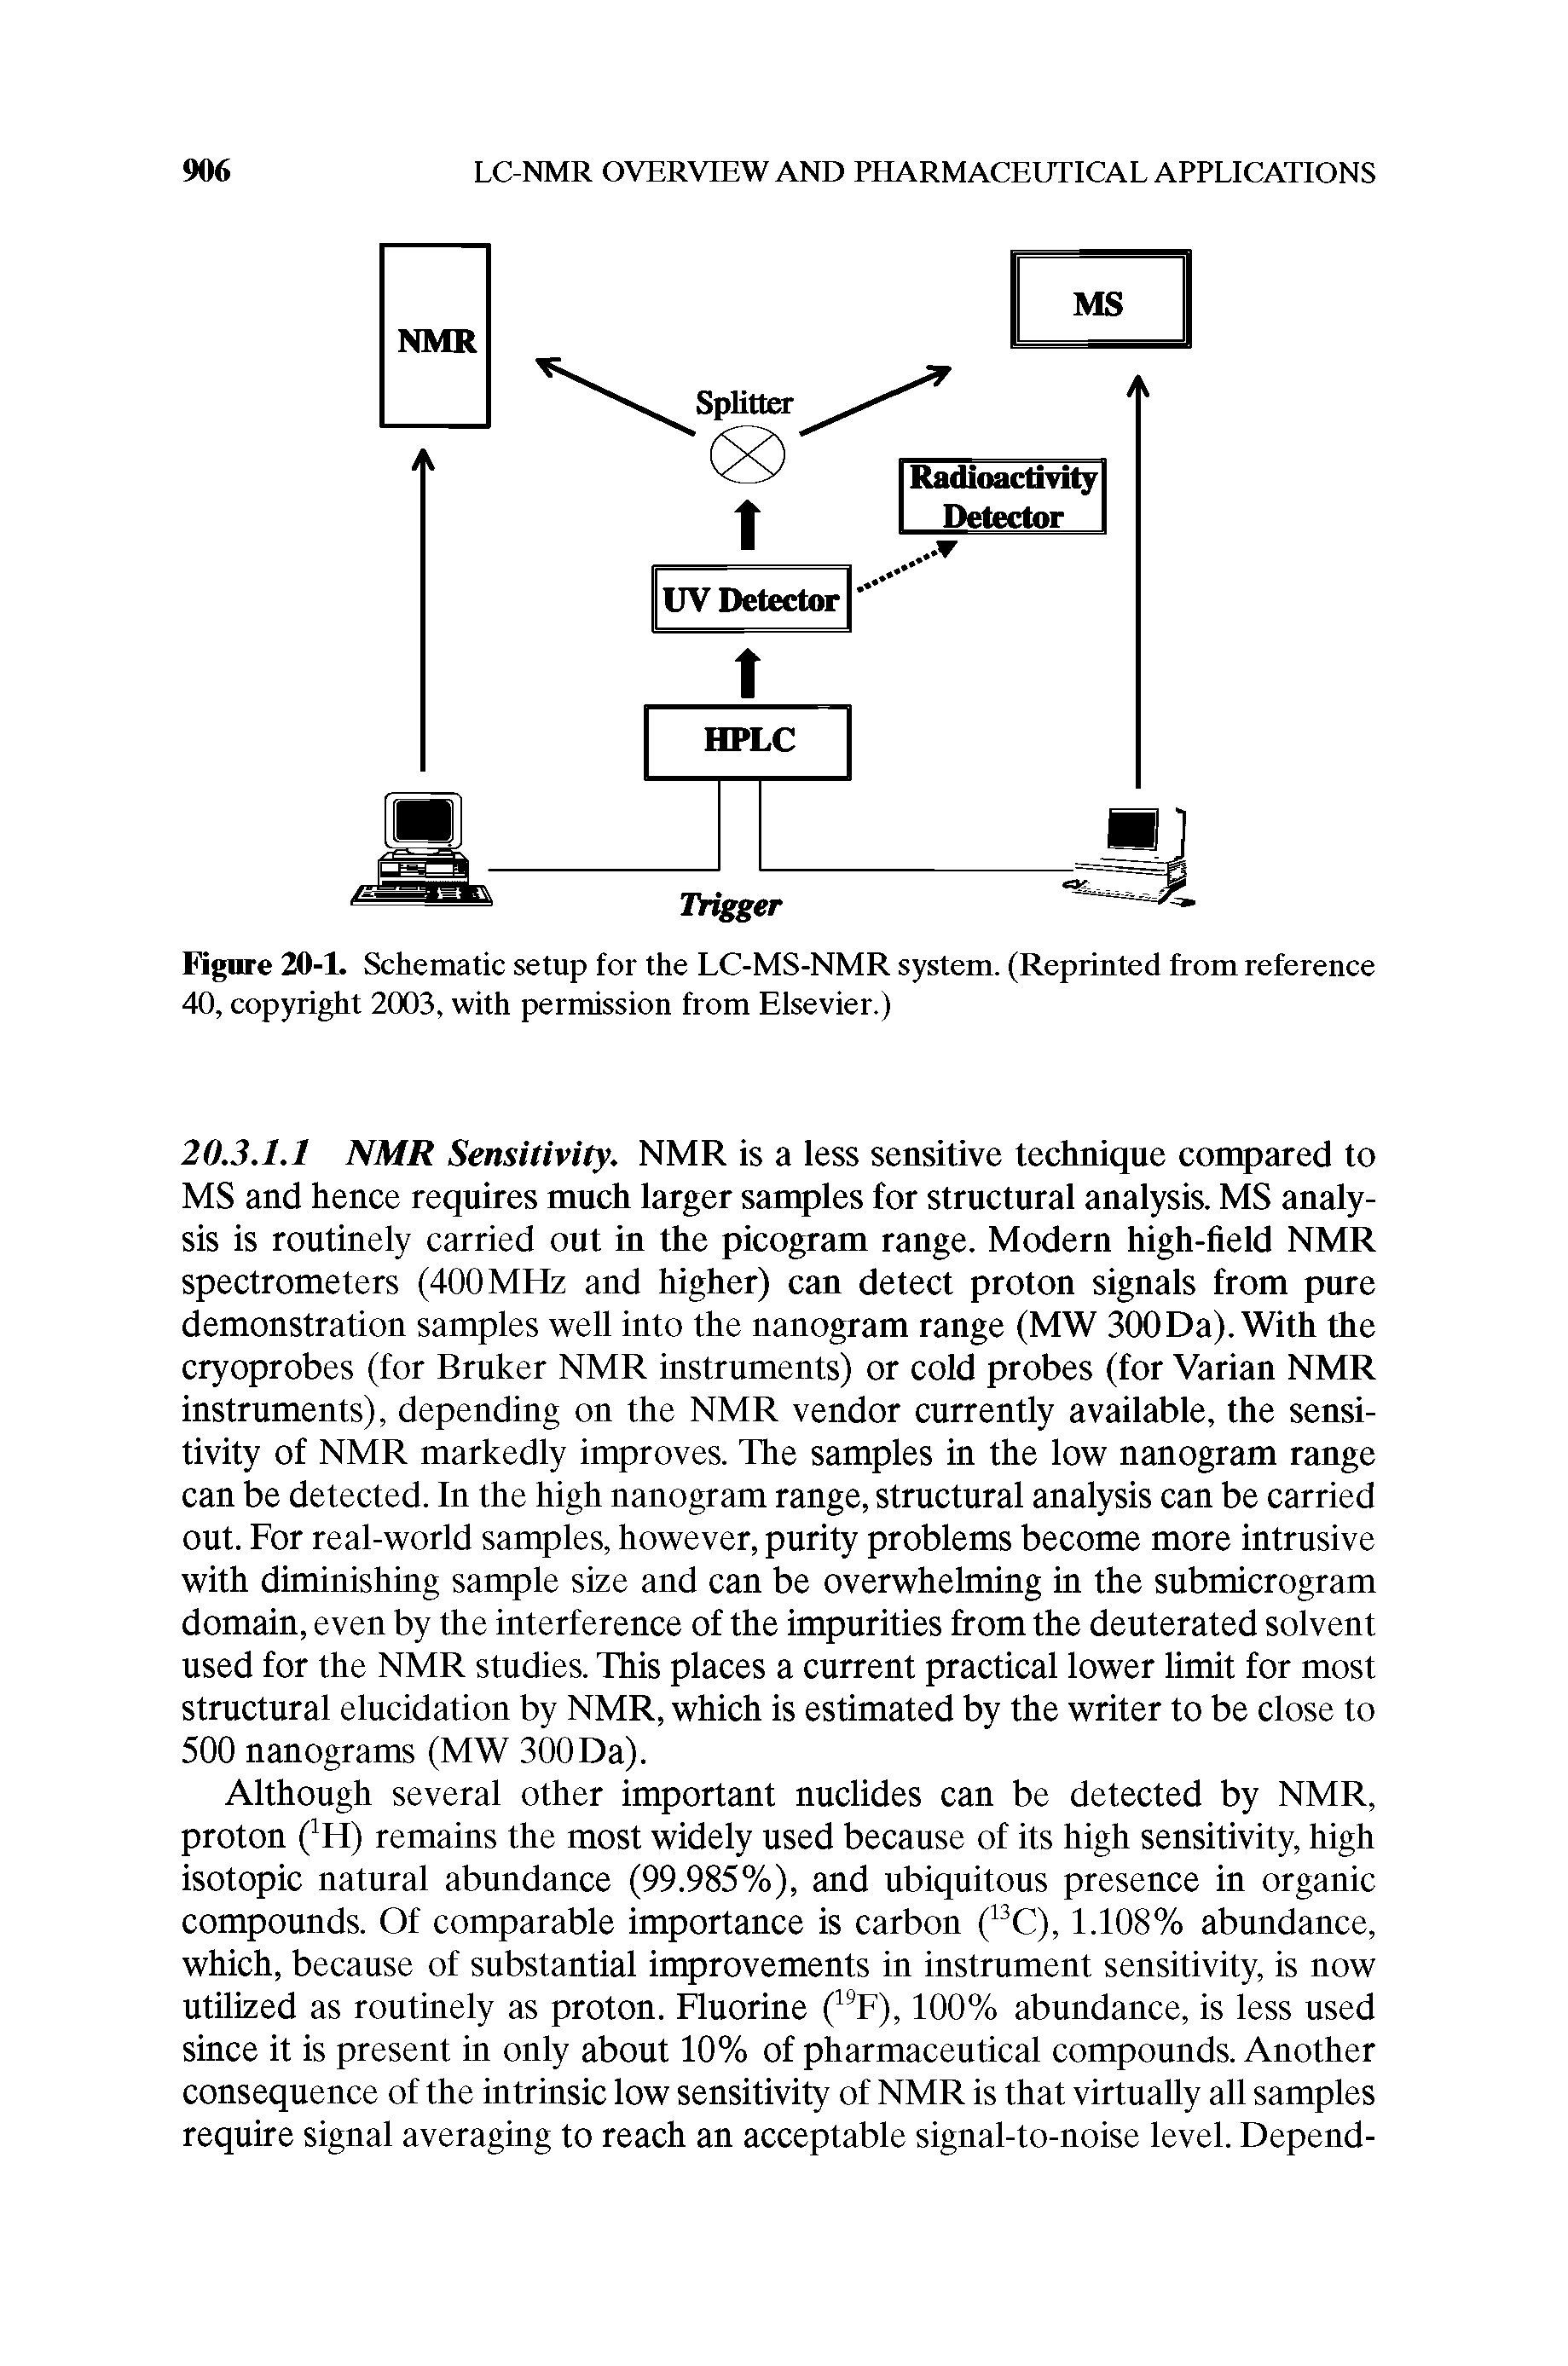 Figure 20-1. Schematic setup for the LC-MS-NMR system. (Reprinted from reference 40, copyright 2003, with permission from Elsevier.)...